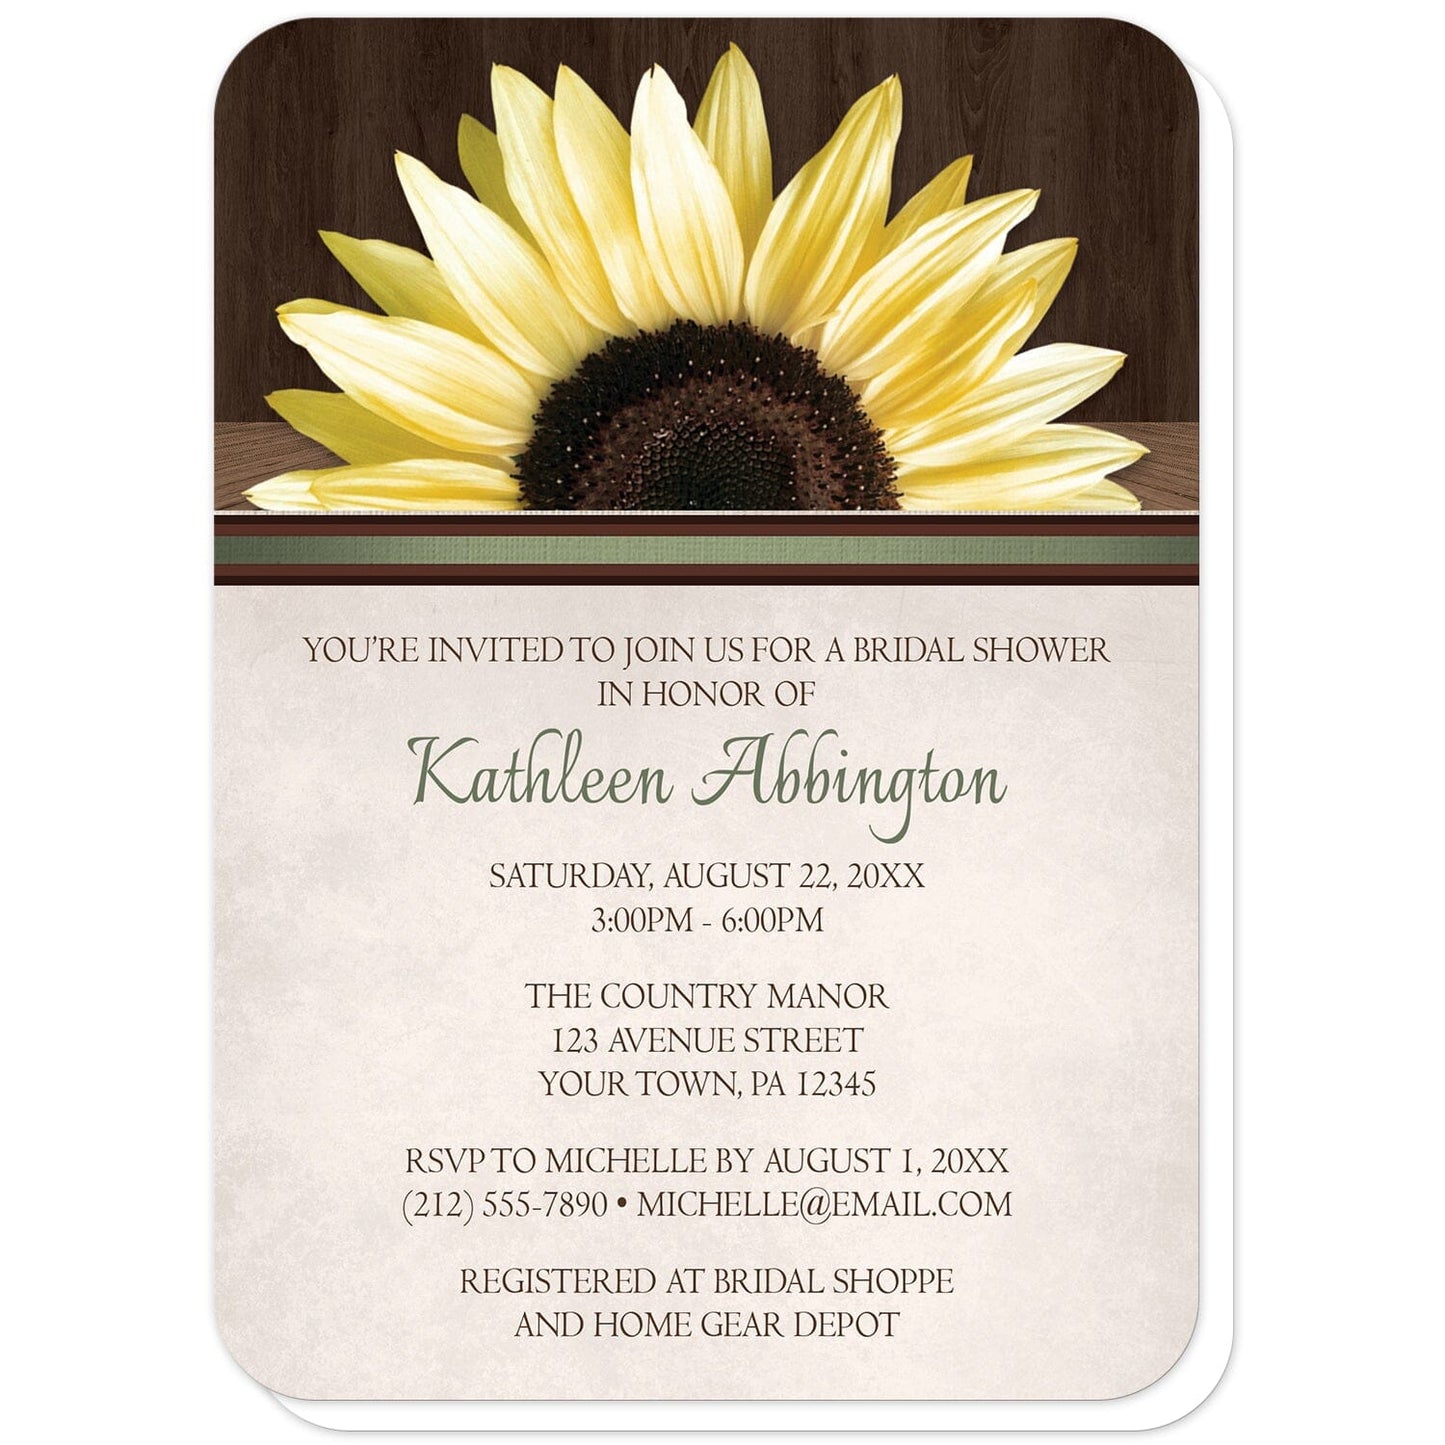 Country Sunflower Over Wood Rustic Bridal Shower Invitations (with rounded corners) at Artistically Invited. Country sunflower over wood rustic bridal shower invitations with a lovely big yellow sunflower on a rustic dark brown wood pattern along the top. Your personalized bridal shower celebration details are elegantly printed in green and brown above a beige parchment background below the sunflower. 